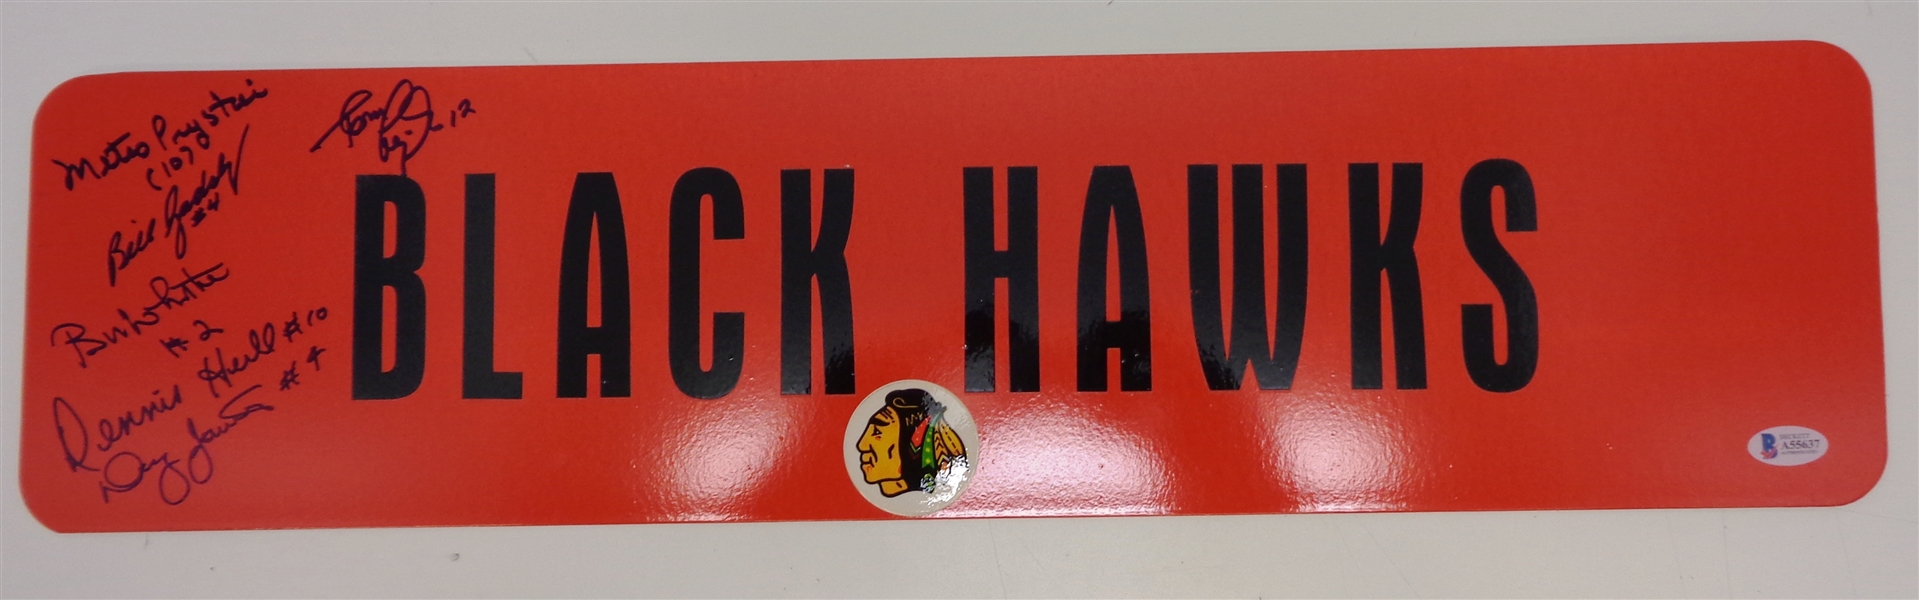 Chicago Blackhawks 6x24 Metal Sign Autographed by 6